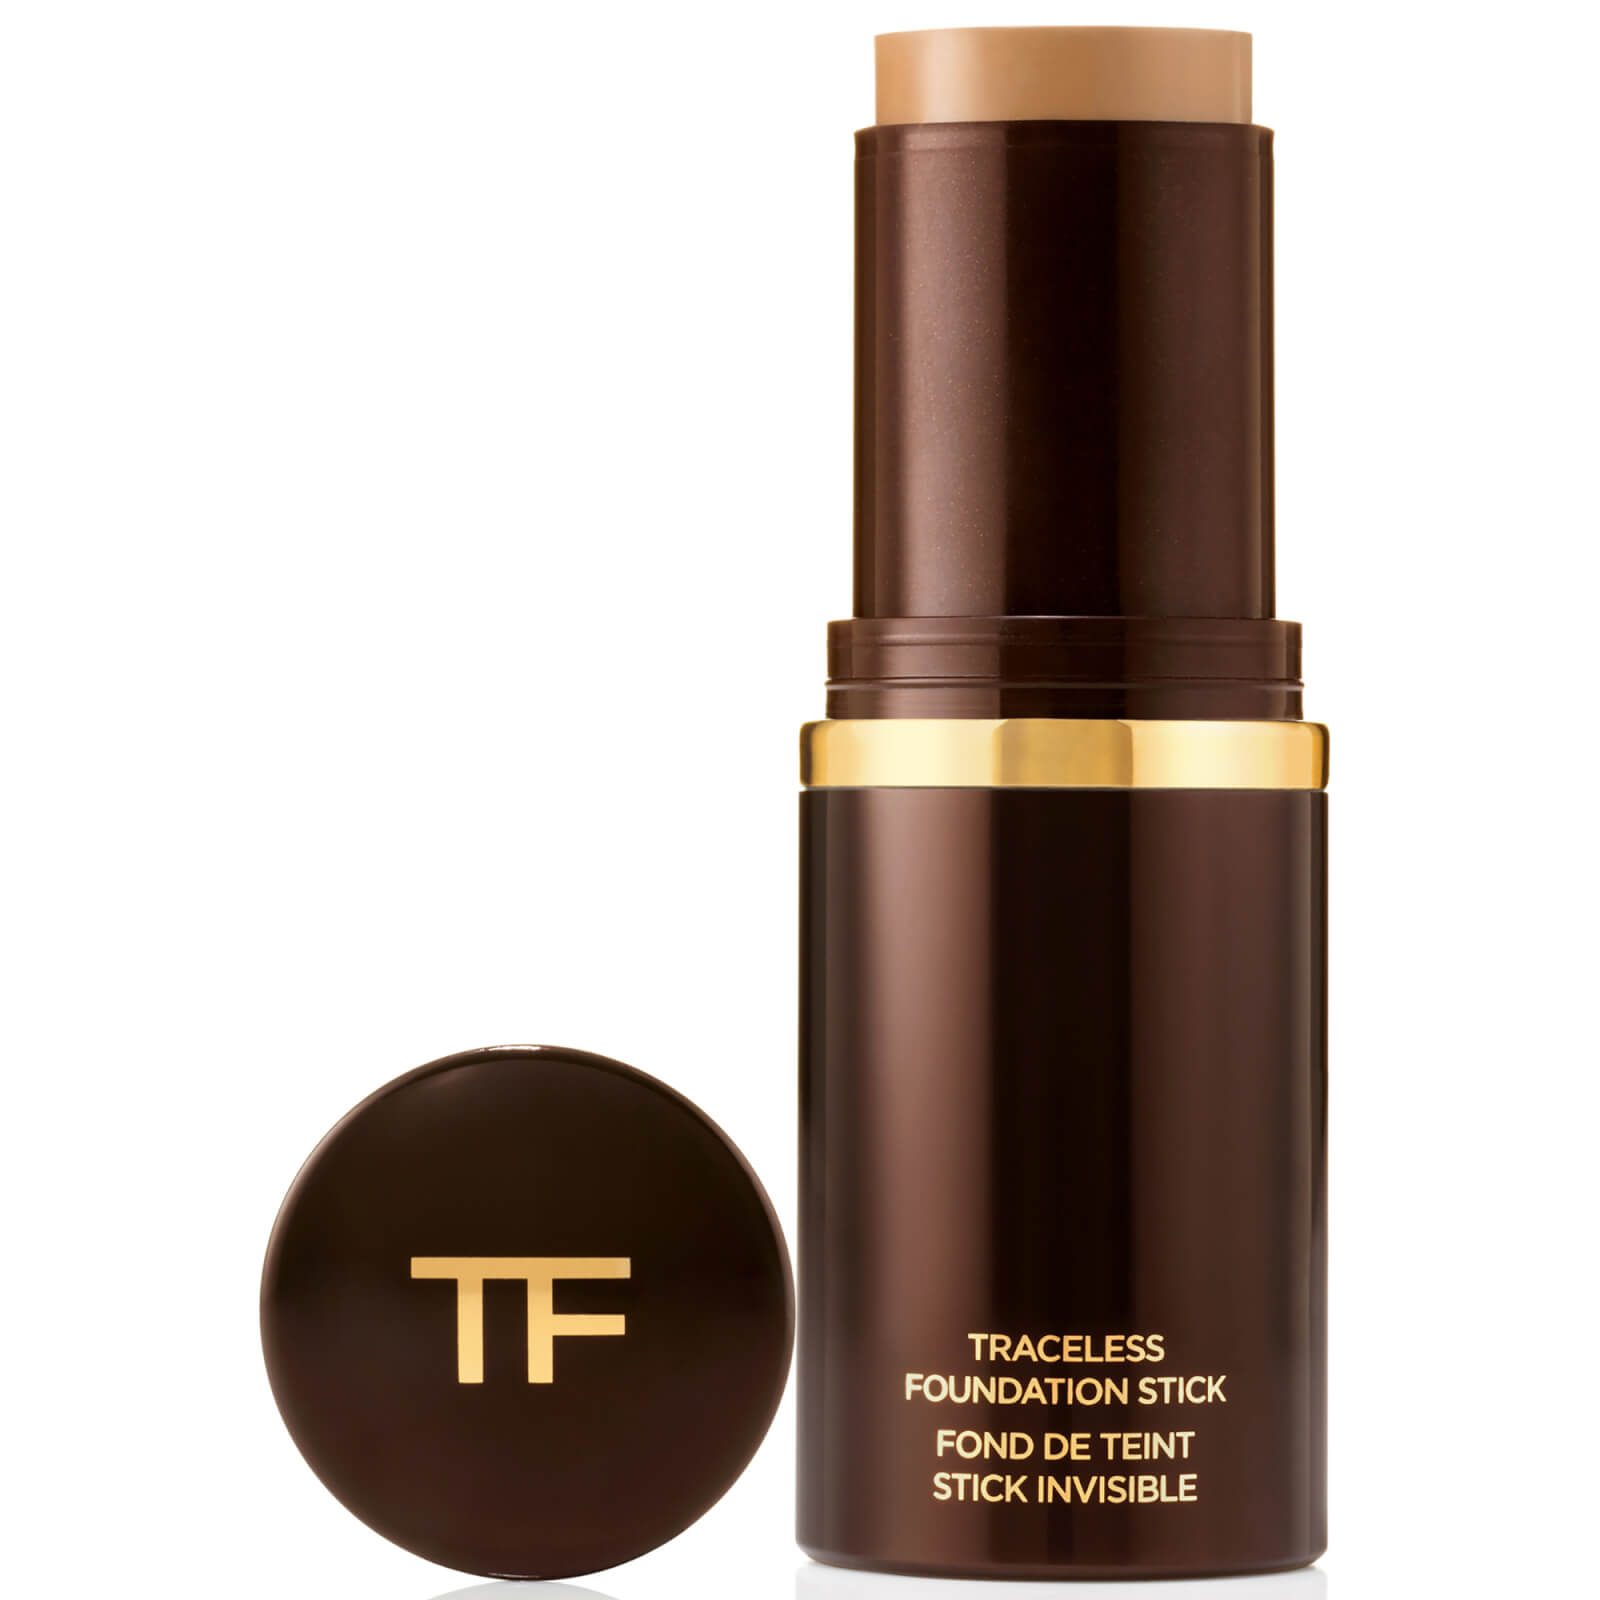 Tom Ford Traceless Foundation Stick 15g (Various Shades) - 8.7 Golden Almond